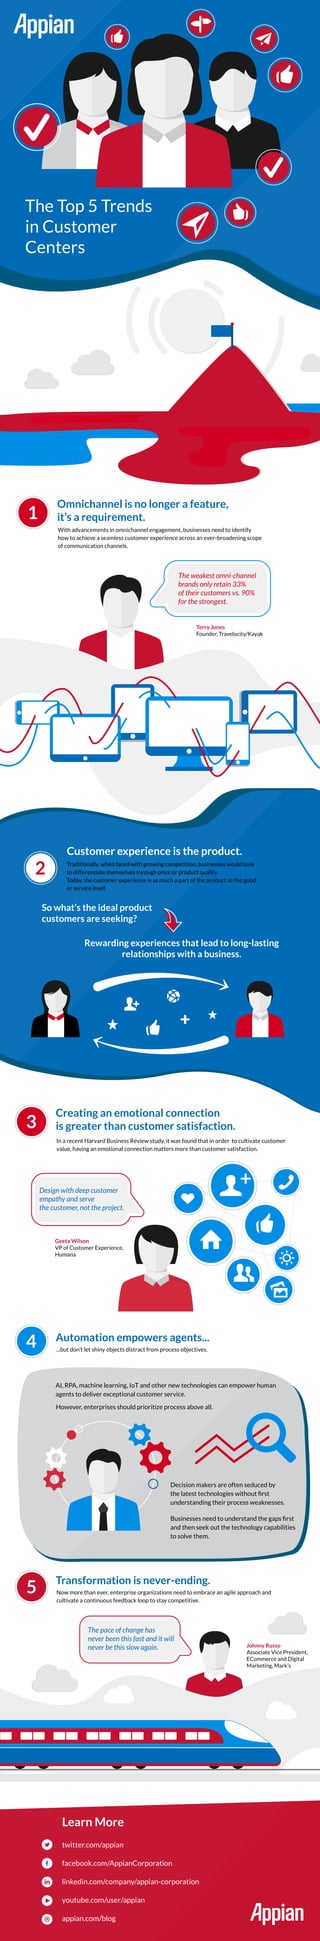 The Top 5 Trends
in Customer
Centers
Omnichannel is no longer a feature,
it’s a requirement.
With advancements in omnichannel engagement, businesses need to identify
how to achieve a seamless customer experience across an ever-broadening scope
of communication channels.
Creating an emotional connection
is greater than customer satisfaction.
In a recent Harvard Business Review study, it was found that in order to cultivate customer
value, having an emotional connection matters more than customer satisfaction.
Automation empowers agents...
...but don’t let shiny objects distract from process objectives.
Transformation is never-ending.
Learn More
Now more than ever, enterprise organizations need to embrace an agile approach and
cultivate a continuous feedback loop to stay competitive.
AI, RPA, machine learning, IoT and other new technologies can empower human
agents to deliver exceptional customer service.
Decision makers are often seduced by
the latest technologies without ﬁrst
understanding their process weaknesses.
Customer experience is the product.
Traditionally, when faced with growing competition, businesses would look
to differentiate themselves through price or product quality.
Today, the customer experience is as much a part of the product as the good
or service itself.
So what’s the ideal product
customers are seeking?
Rewarding experiences that lead to long-lasting
relationships with a business.
Design with deep customer
empathy and serve
the customer, not the project.
Geeta Wilson
VP of Customer Experience,
Humana
The pace of change has
never been this fast and it will
never be this slow again. Johnny Russo
Associate Vice President,
ECommerce and Digital
Marketing, Mark’s
The weakest omni-channel
brands only retain 33%
of their customers vs. 90%
for the strongest.
Businesses need to understand the gaps ﬁrst
and then seek out the technology capabilities
to solve them.
However, enterprises should prioritize process above all.
twitter.com/appian
facebook.com/AppianCorporation
linkedin.com/company/appian-corporation
youtube.com/user/appian
appian.com/blog
Terry Jones
Founder, Travelocity/Kayak
1
3
4
5
2
 